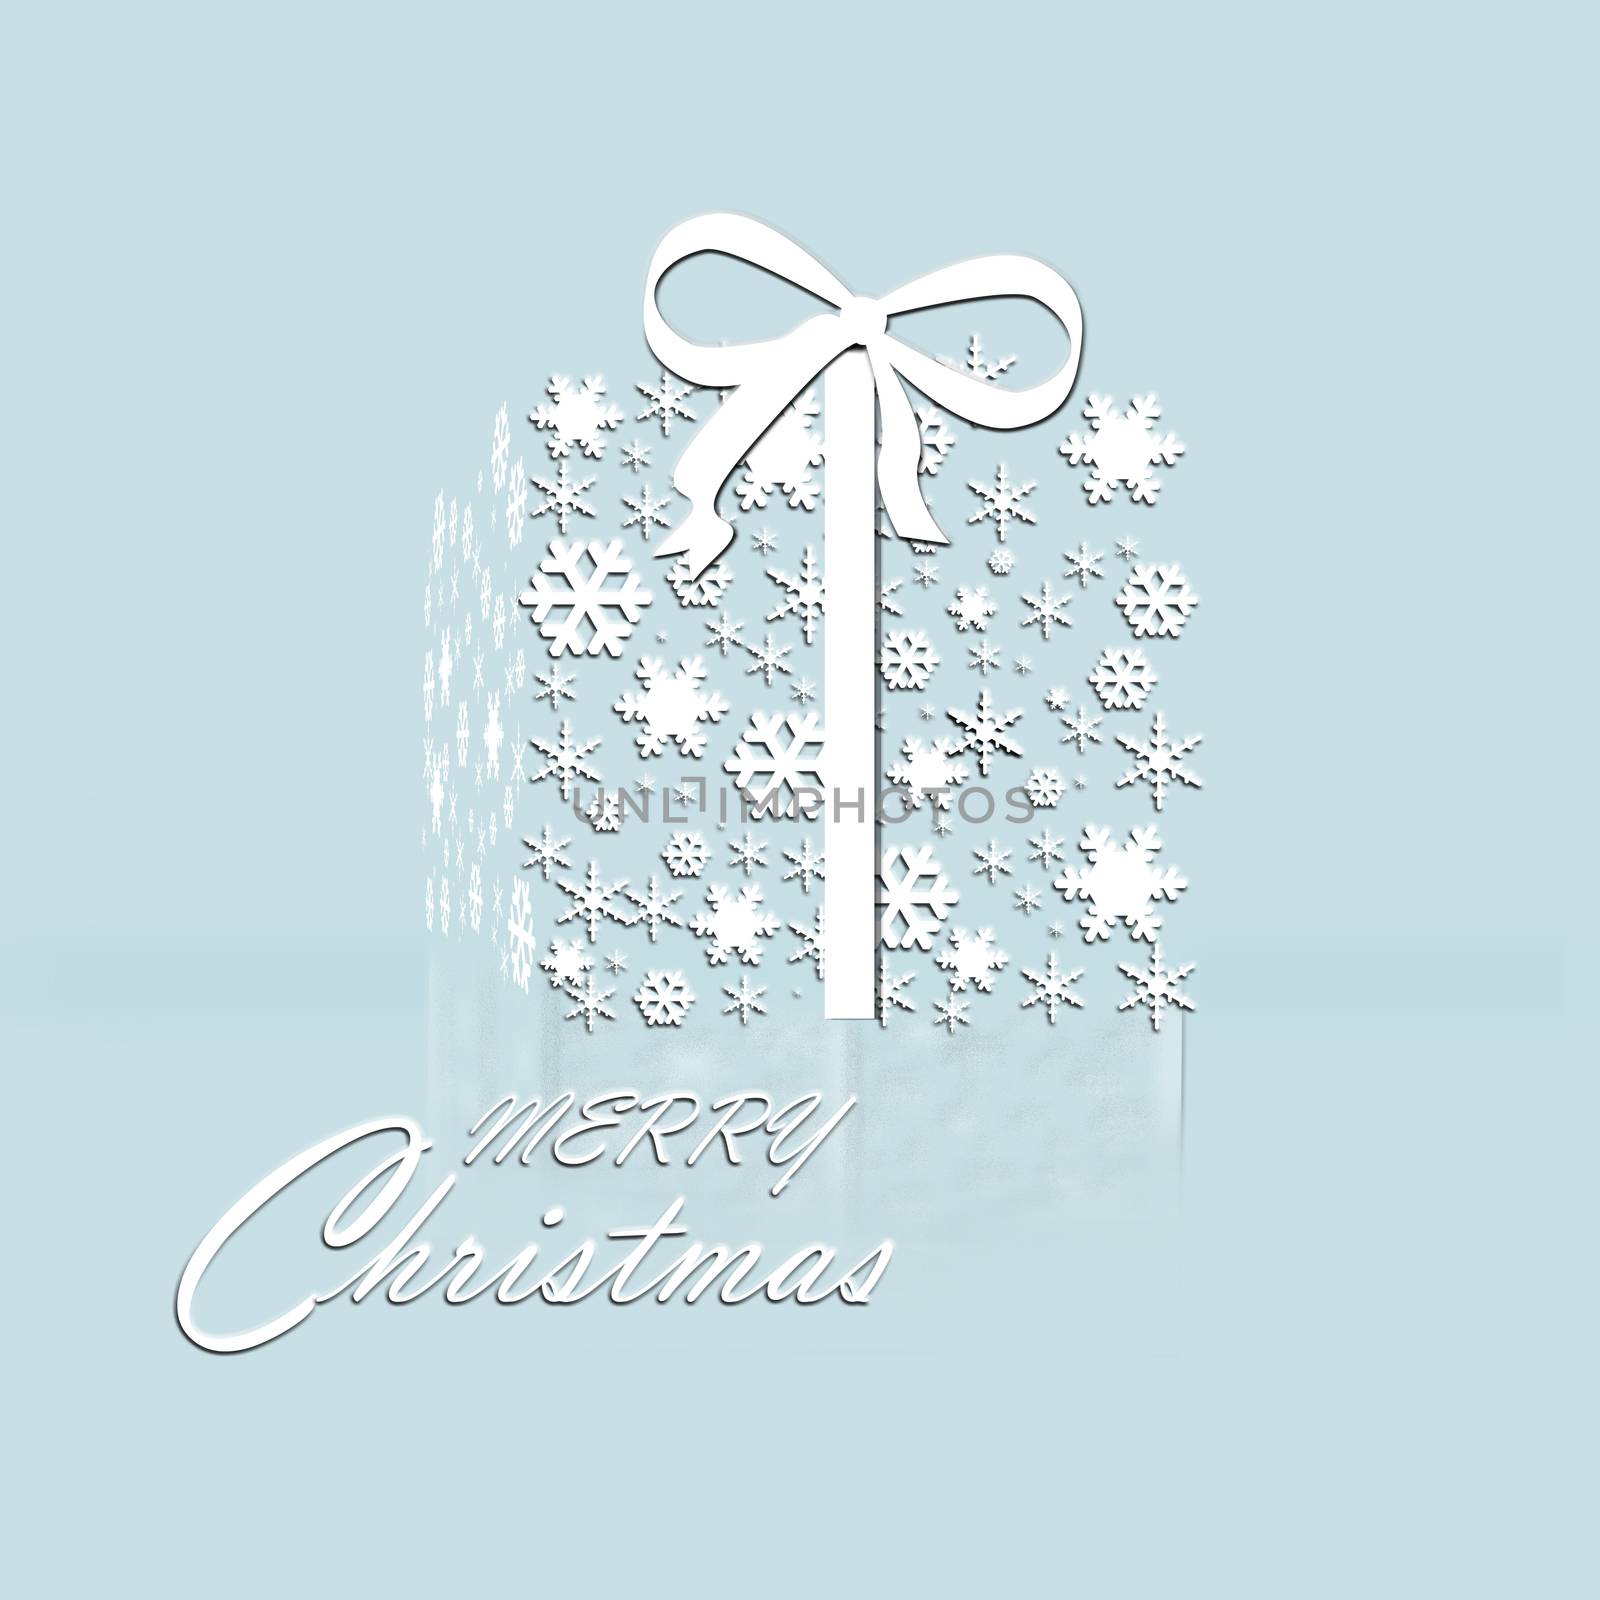 Premium luxury Christmas background for holiday greeting card. White decoration ornament with pattern of winter decoration snowflakes on blue background. Calligraphy Merry Christmas. 3D illustration